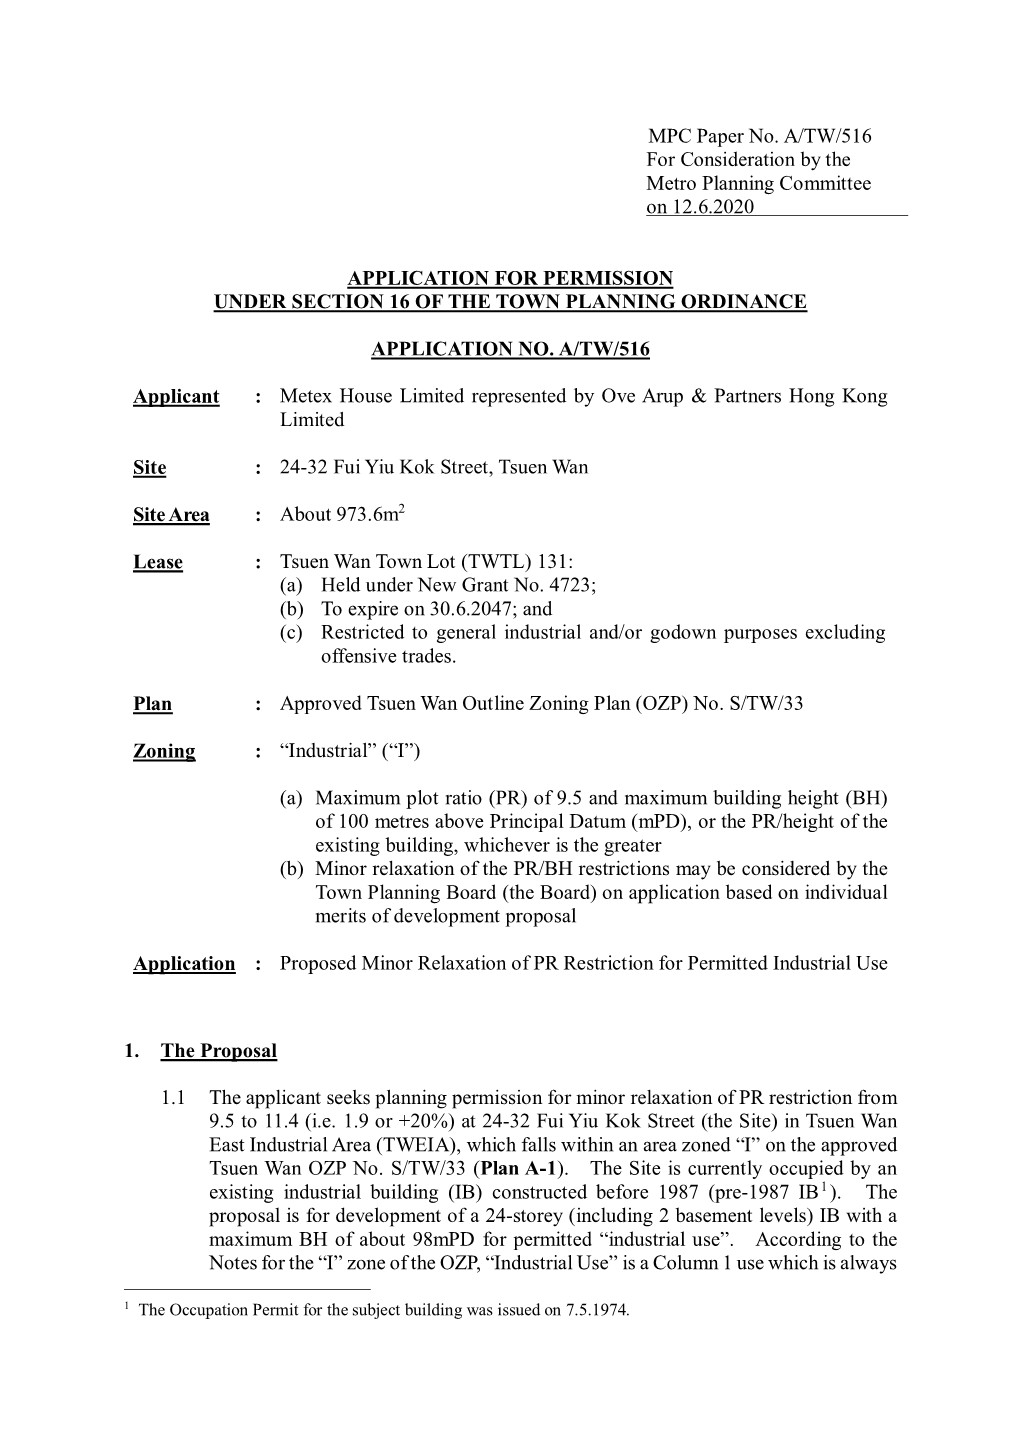 MPC Paper No. A/TW/516 for Consideration by the Metro Planning Committee on 12.6.2020